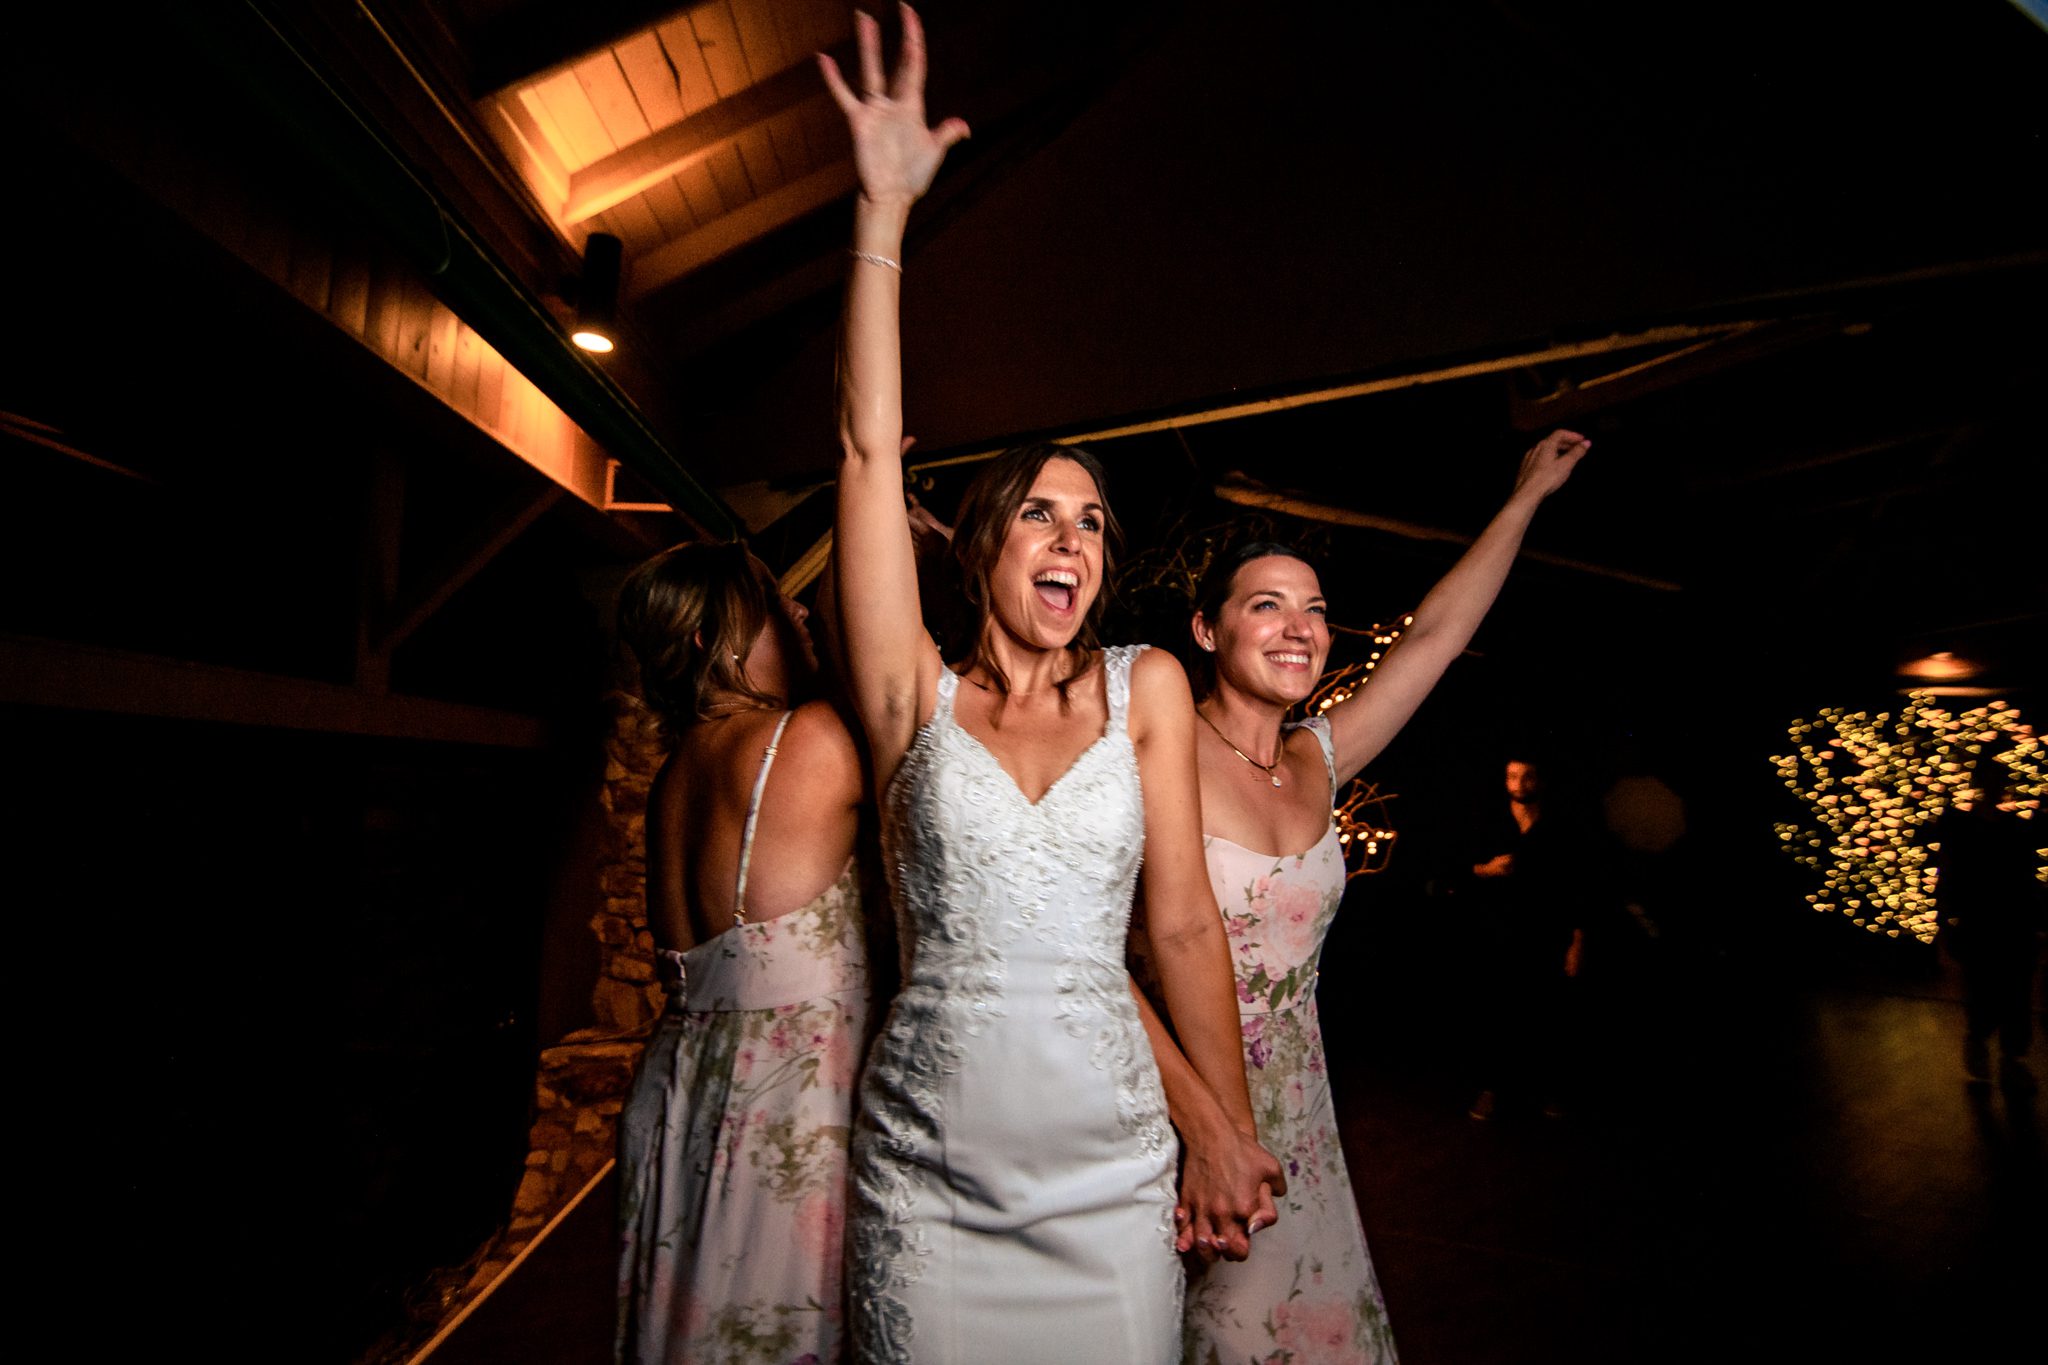 Two bridesmaids dancing on the dance floor at night at the crest pavilion.